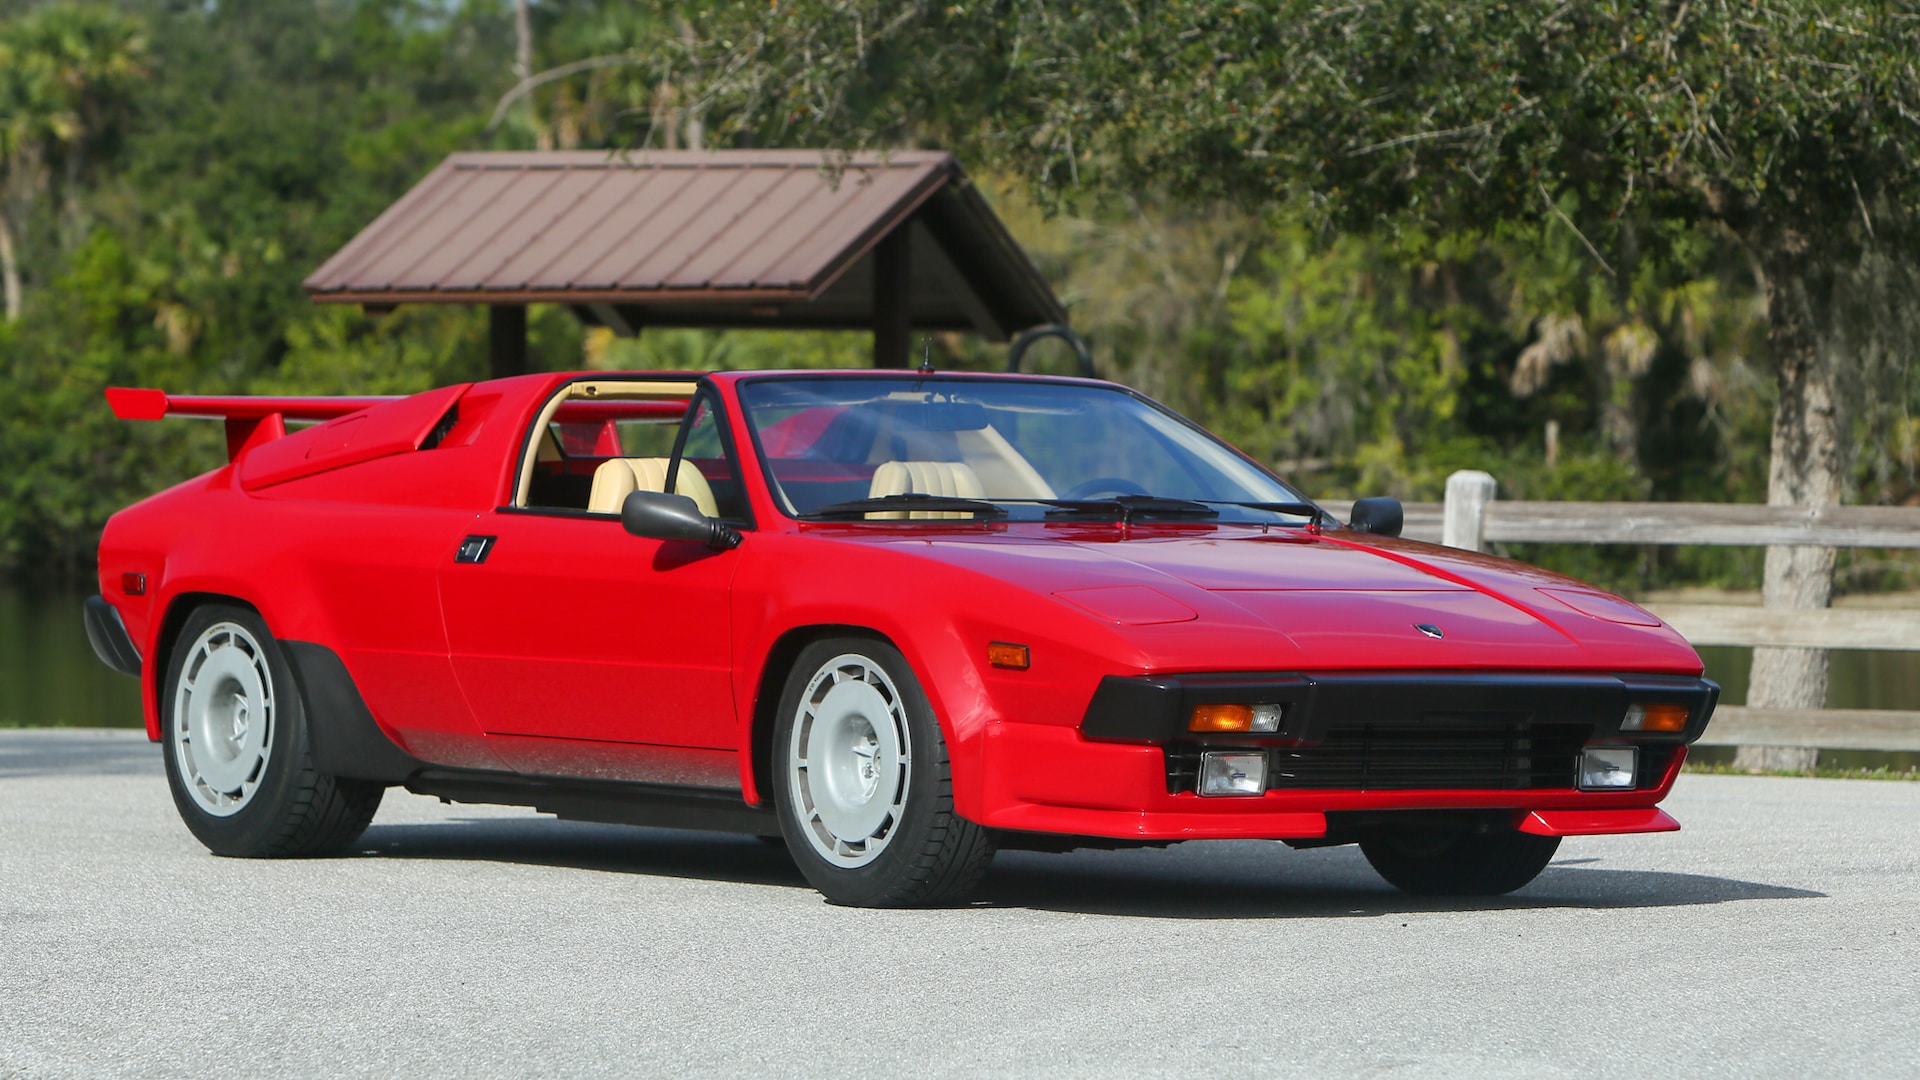 Front-angled view of a red Lamborghini Jalpa